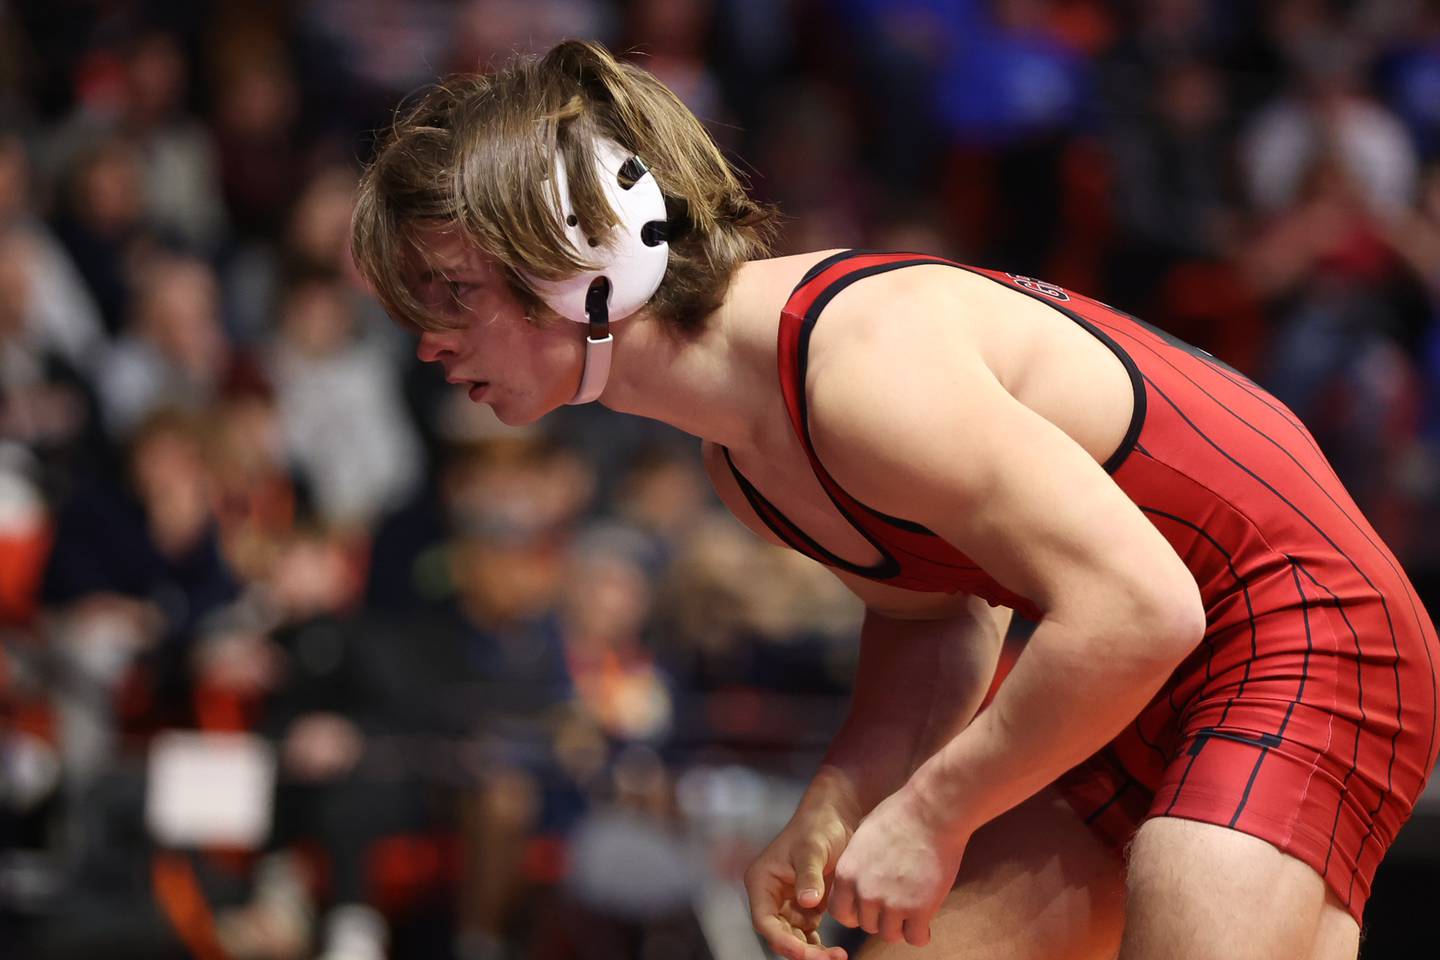 Erie-Prophetstown’s Jase Grunder faces off against Lena Winslow’s Garrett Luke in the Class 1A 145lb. semifinals at State Farm Center in Champaign. Friday, Feb. 18, 2022, in Champaign.